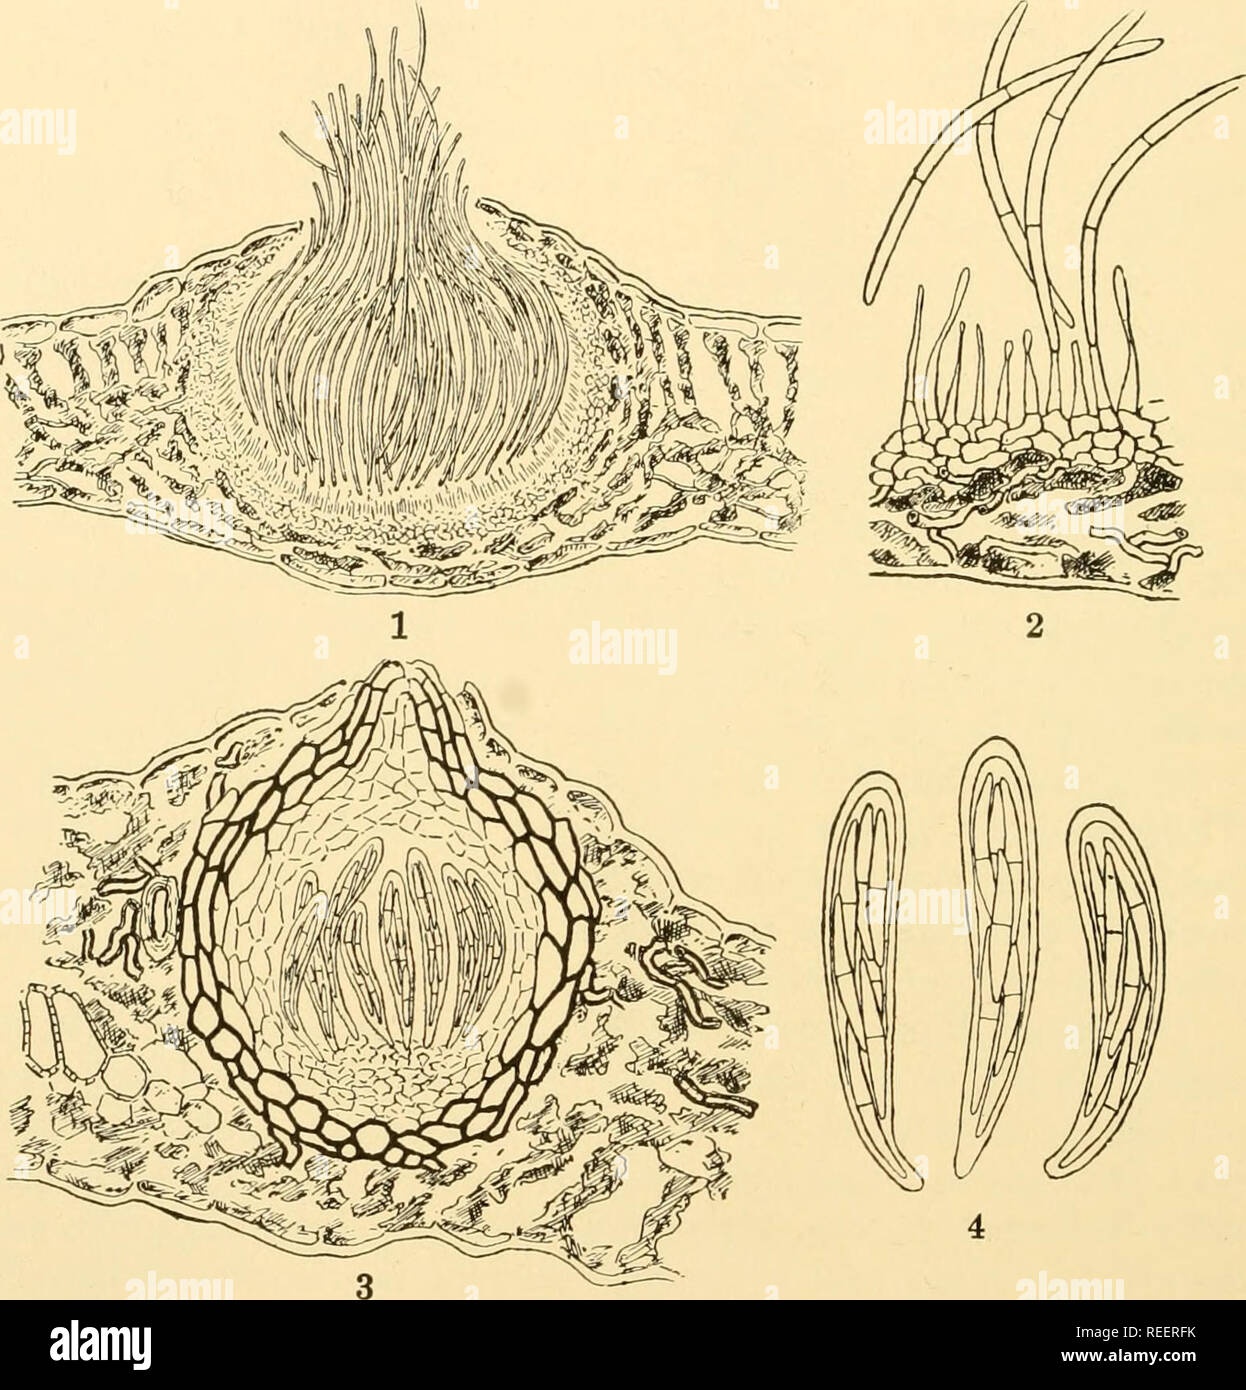 . Comparative morphology of Fungi. Fungi. 268 COMPARATIVE MORPHOLOGY OF FUNGI To Septorisphaerella belong Mycosphaerella Hippocastani (Carlia Hippocastani), a leaf spot of Aesculus Hippocastanum, and M. sentina, a leaf spot of pear. As imperfect forms besides pycnia with multicellular conidia (Septoria aesculicola), Klebahn (1918) found in culture free falcate conidia similar to Septoria conidia which are cut off laterally on hyphae and also pycnia with very small bacilliform microconidia.. Fig. 178.—Mycosphaerella sentina. 1. Pycnial stage. Septoria pyricola. 2. Part of perithecial wall. 3. P Stock Photo